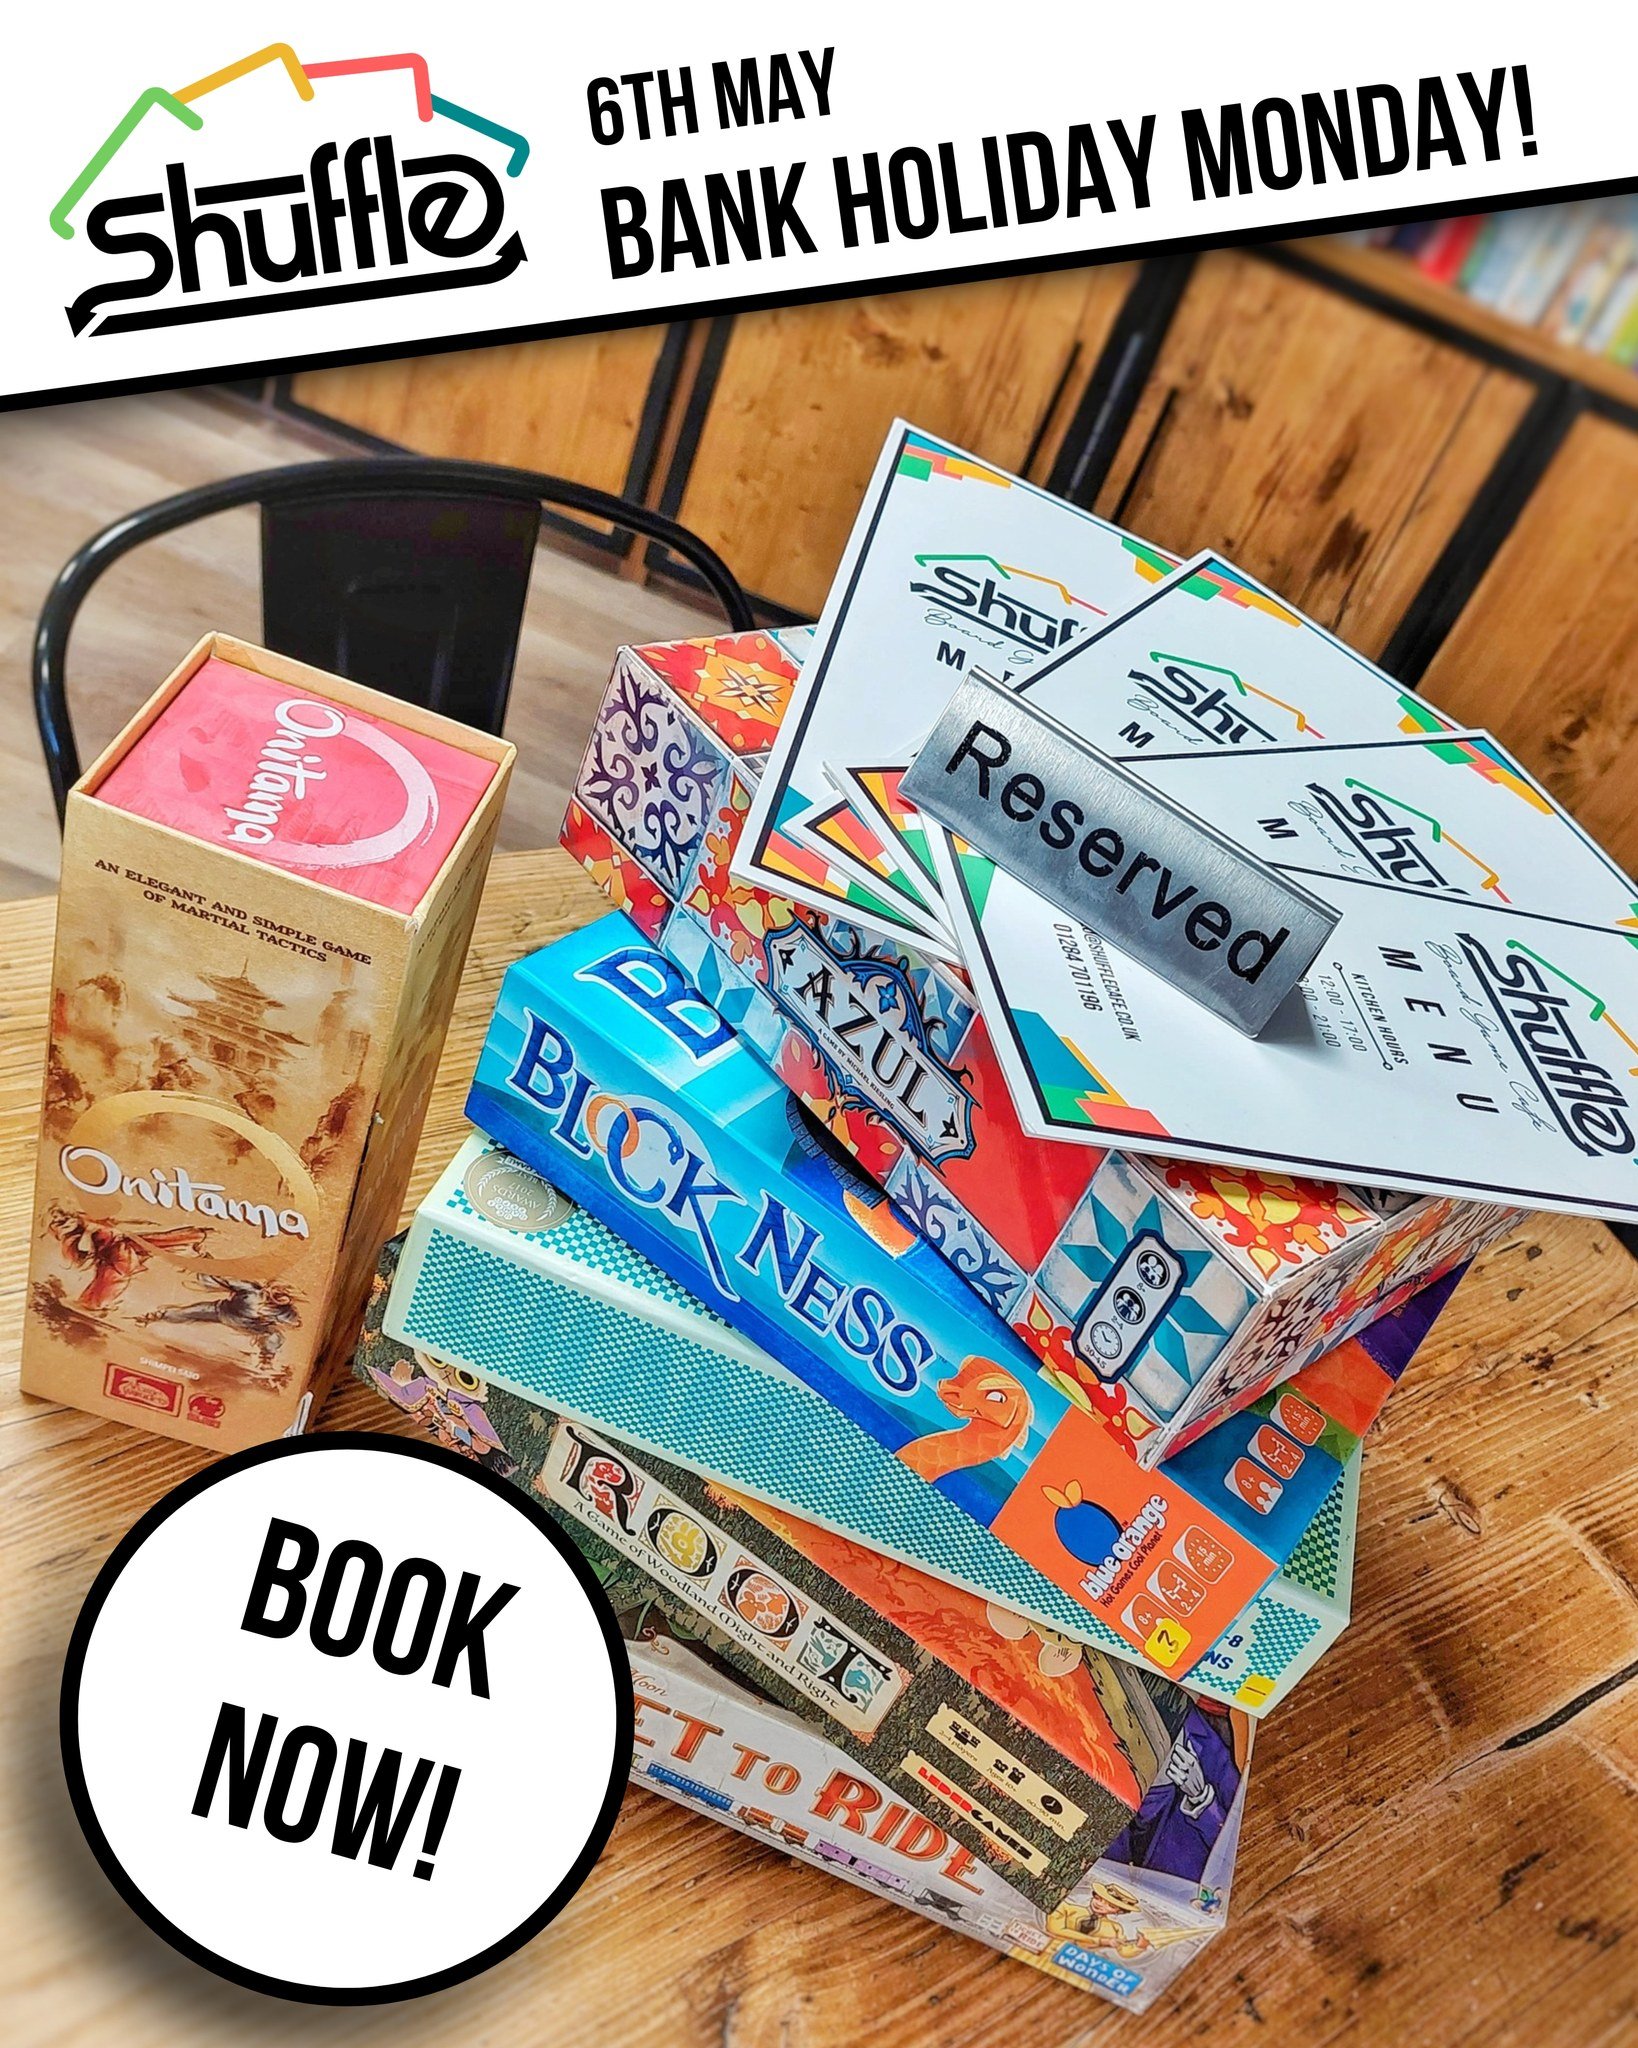 Did somebody say Bank Holiday Monday? Awwww yeah! Monday 6th May is that beautiful bonus day off! Usually, Shuffle is closed on Mondays, but we ARE OPEN on Bank Holidays! 

Doors open at 12 midday, and we're open until 6pm. Want to make a booking enq